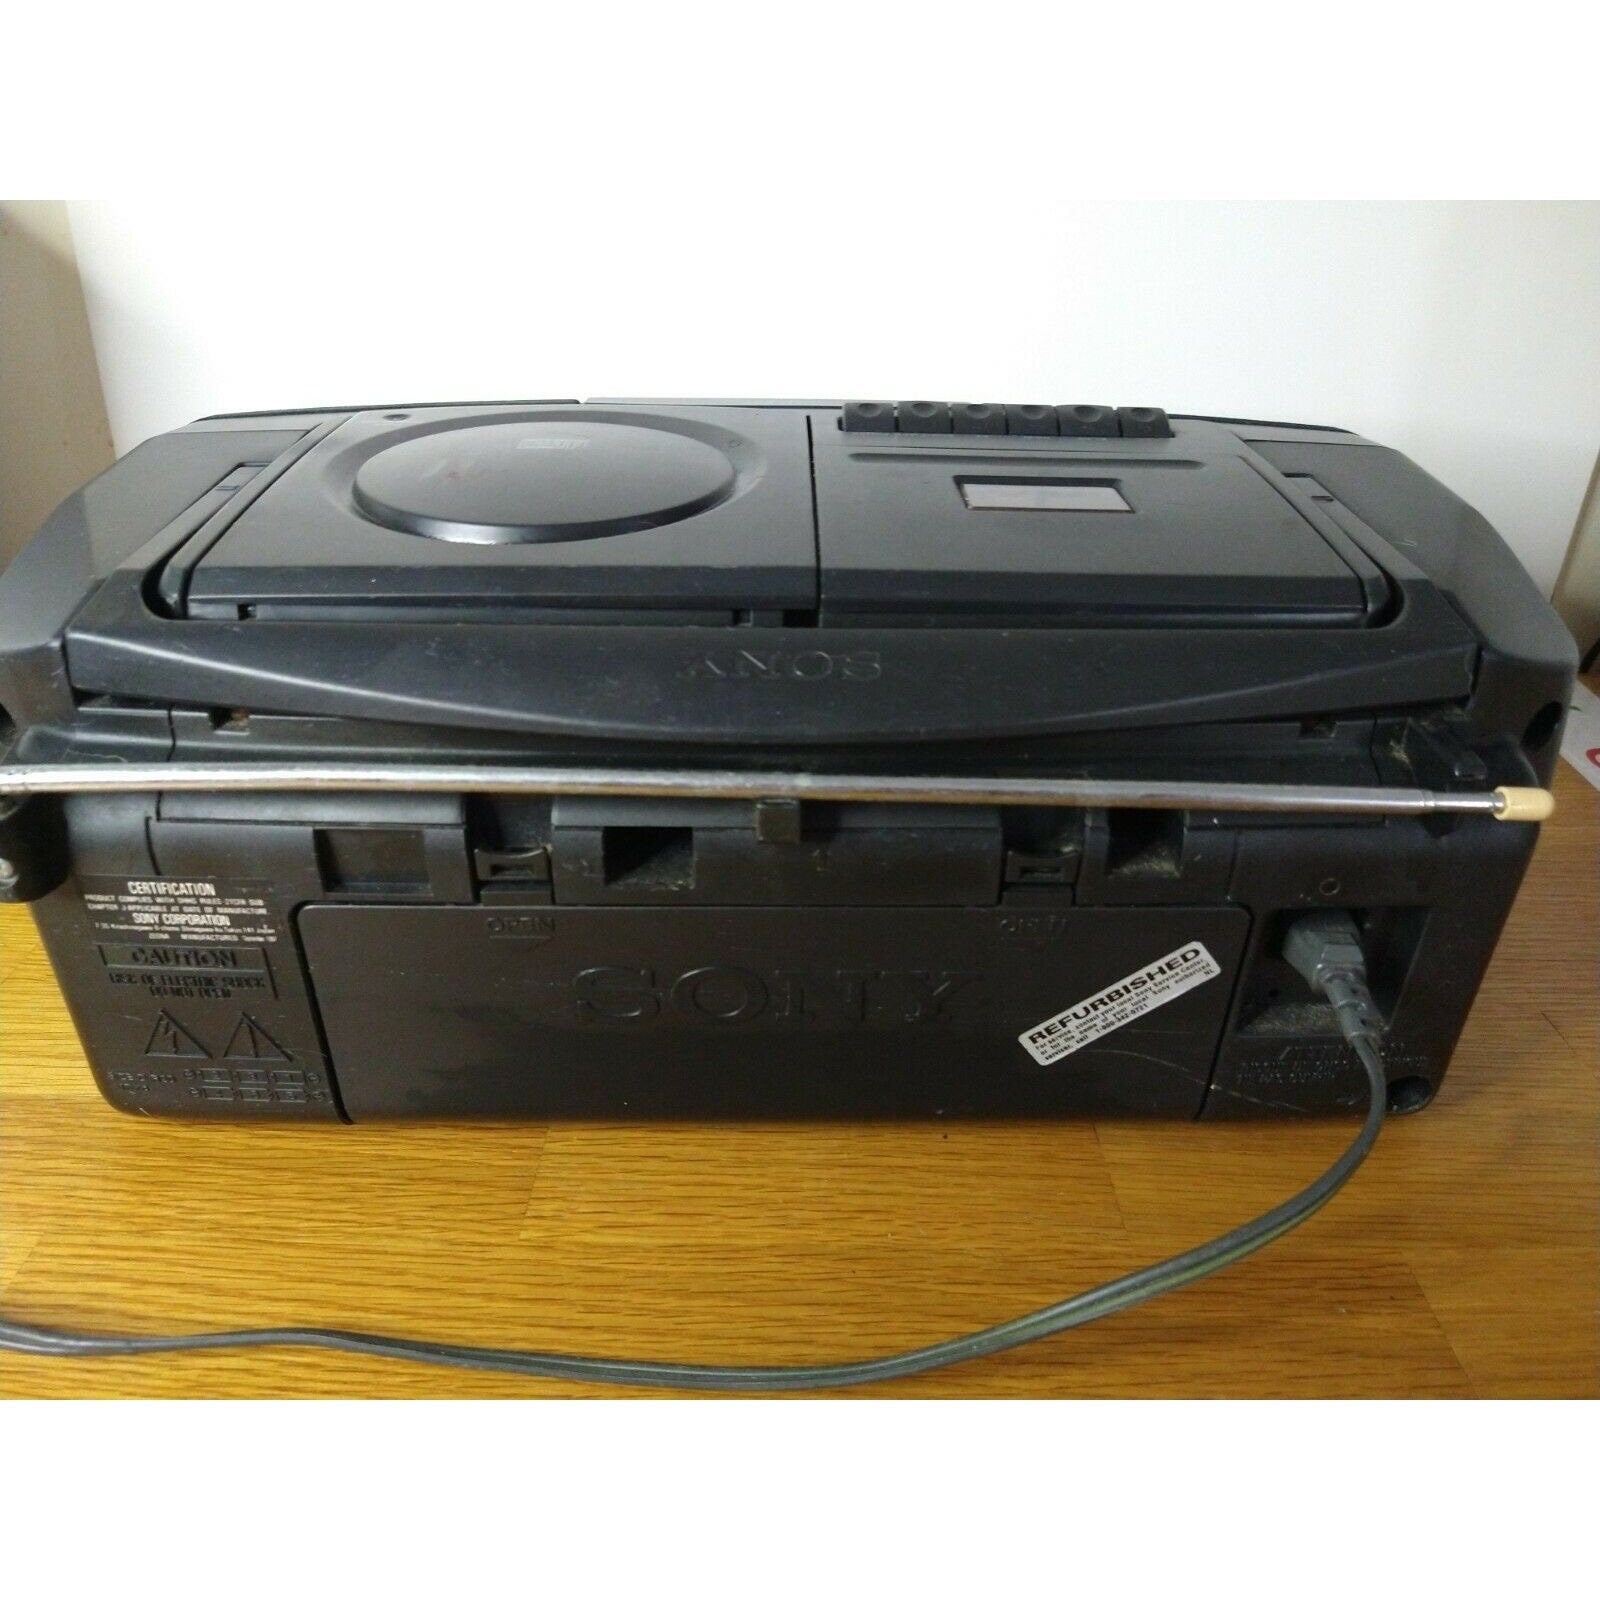 Sony CFD-S33 Am/Fm Radio CD Cassette Stereo Player Mega Bass Portable Boombox